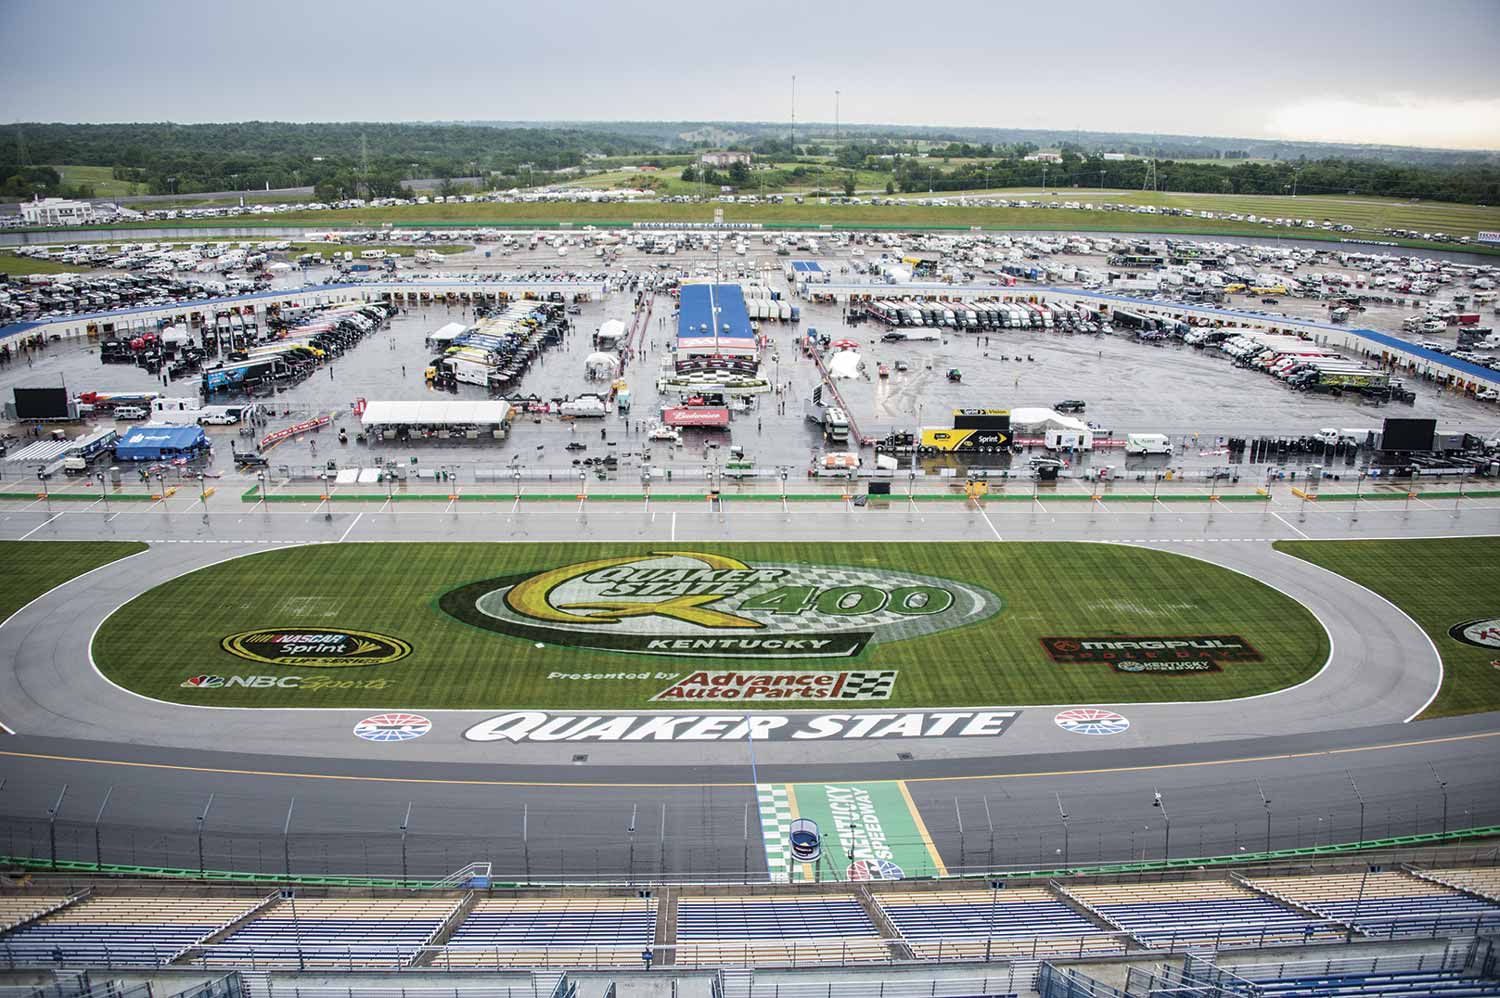  The large Kentucky Speedway venue hosts not only NASCAR and Indy races, but numerous smaller events throughout the year that keep the sheriff’s office personnel busy. (Photo by Jim Robertson) 